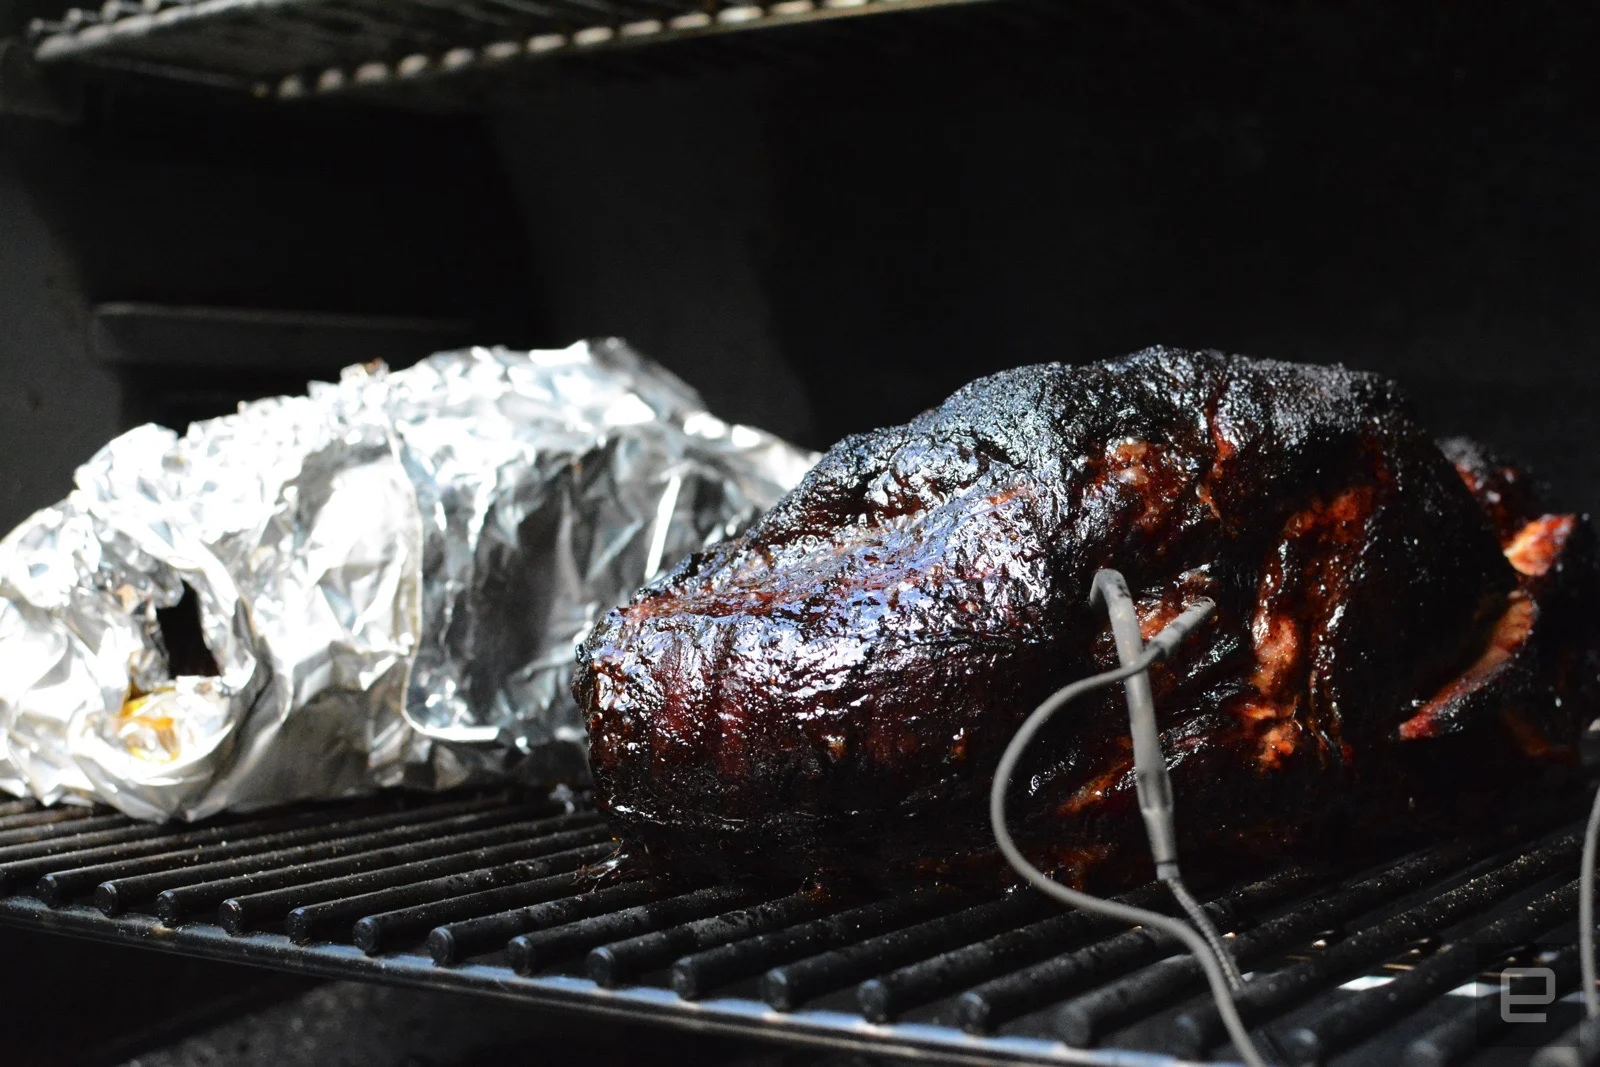 Traeger Timberline 850 Review: Shows Promise, but Its Flaws Leave it  Undercooked